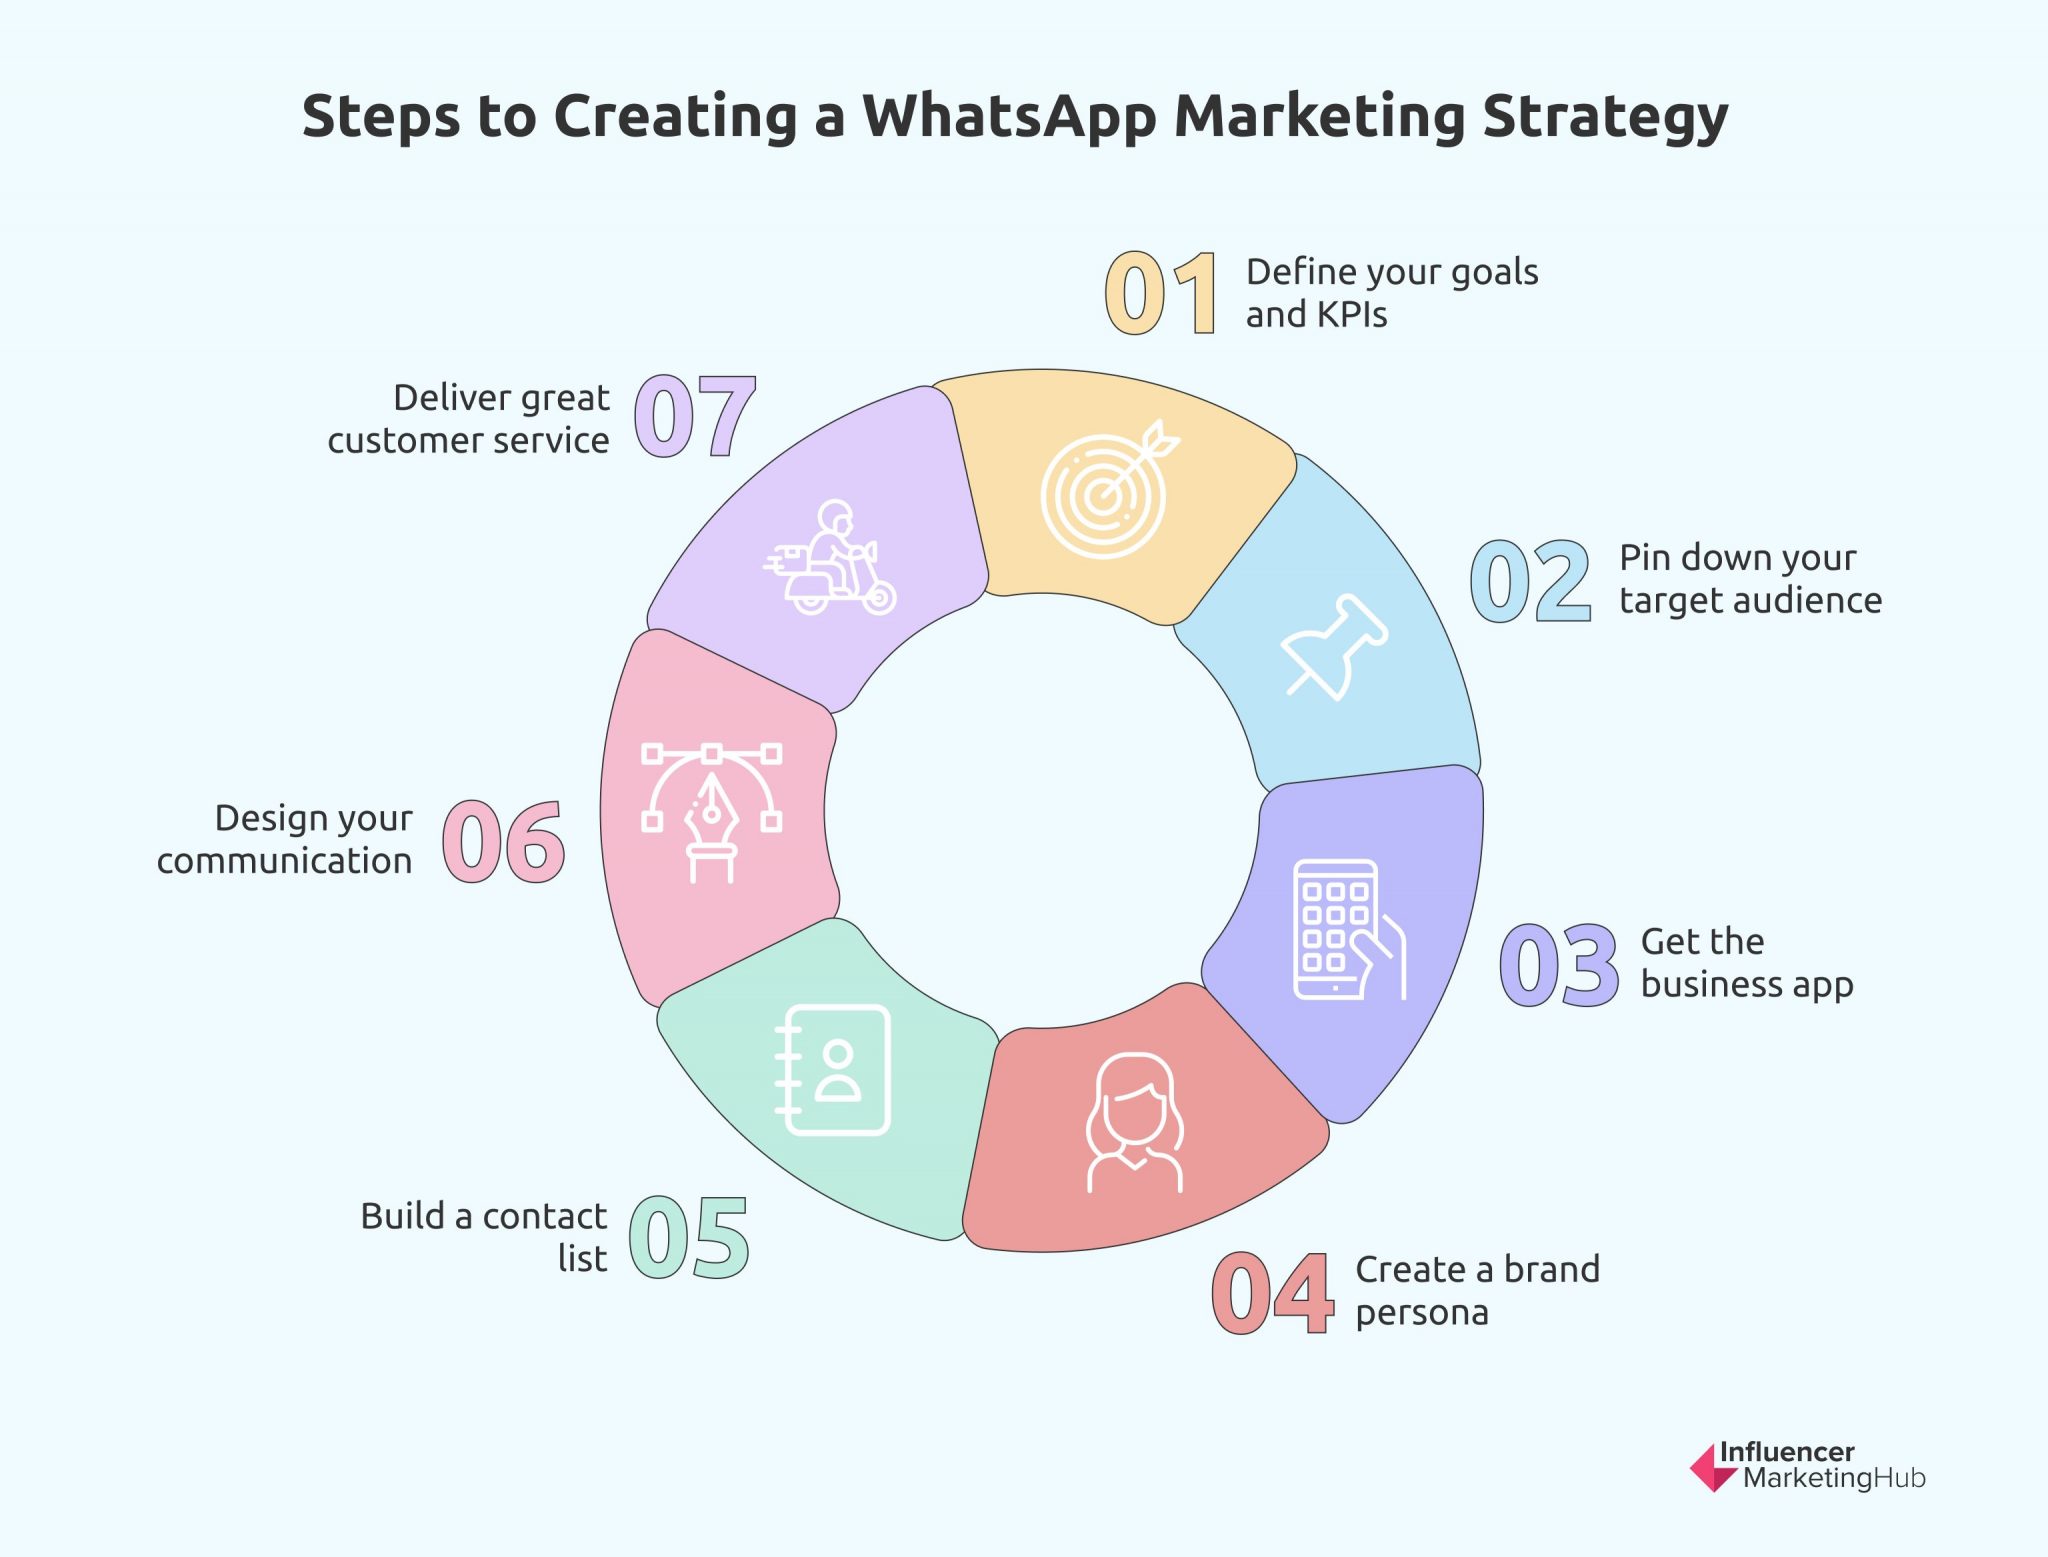 How to Develop a WhatsApp Marketing Service Strategy